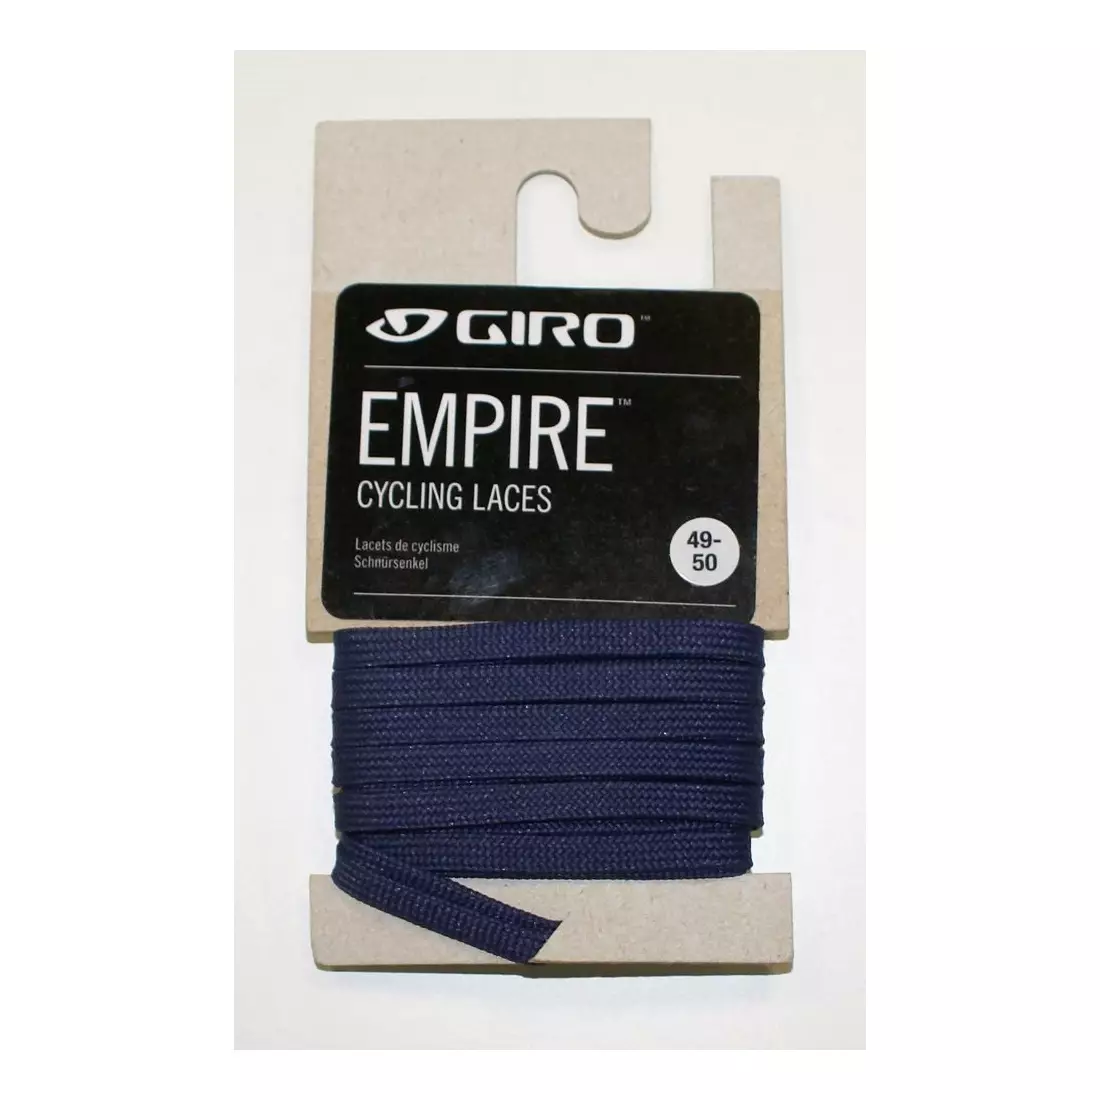 GIRO laces for cycling shoes EMPIRE LACES purple GR-7084152